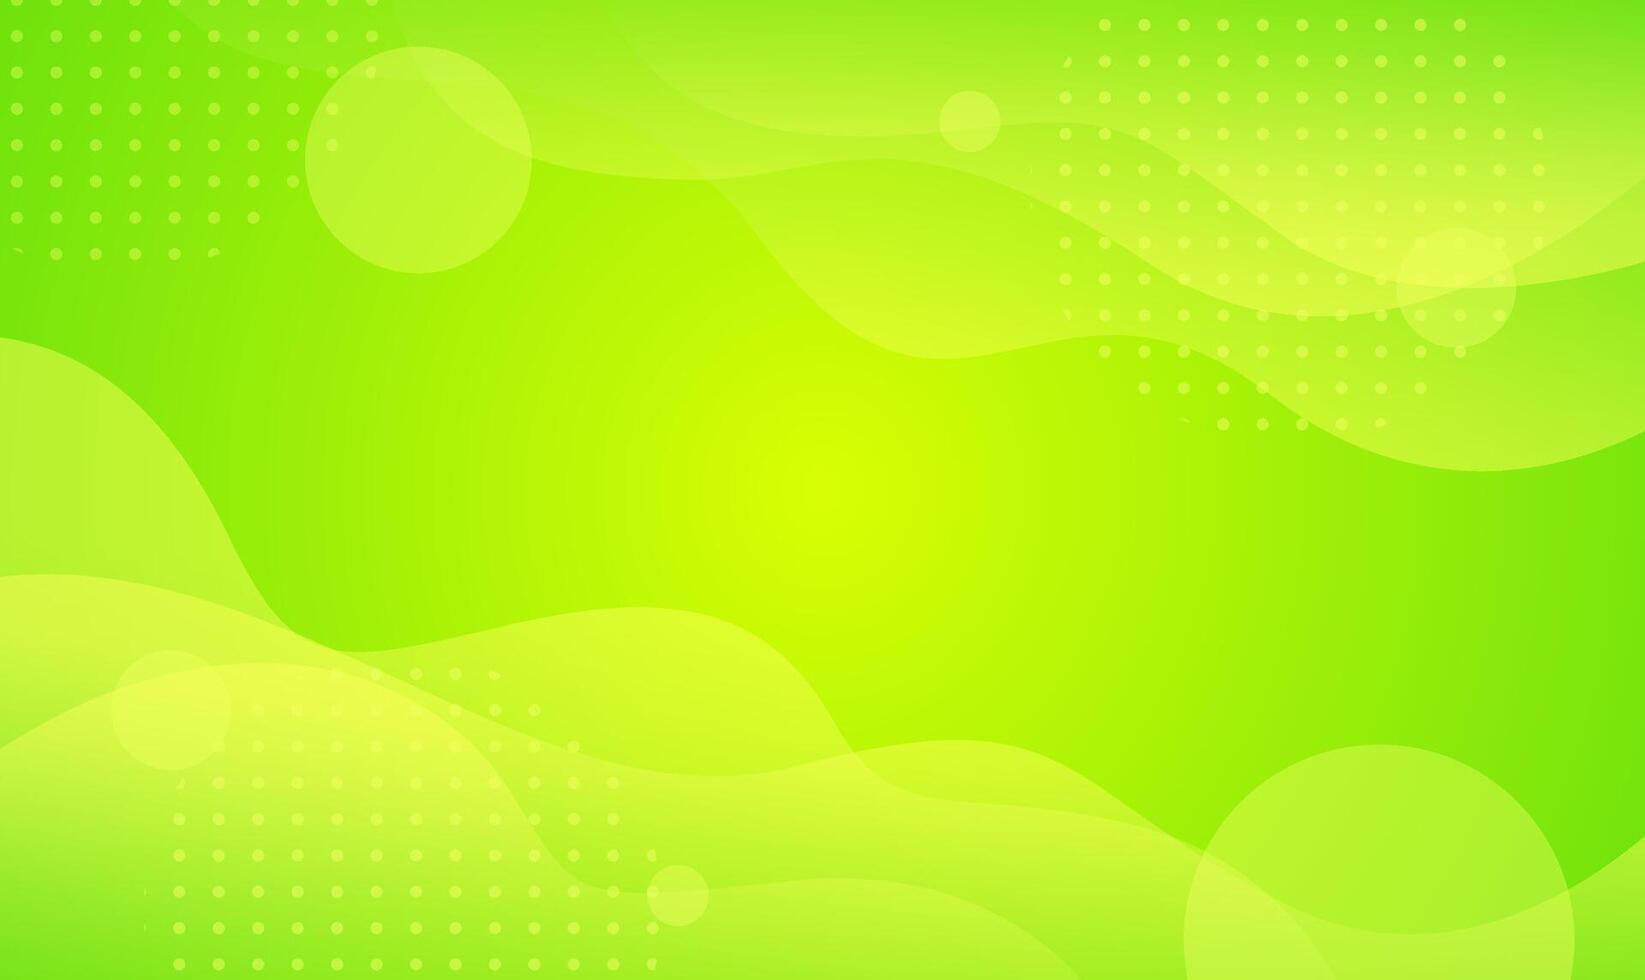 Bright green-yellow waves abstract background. Modern gradient green color. Fresh template banner for sale, events, advertising, holidays, summer, and parties. liquid form with soft shadows vector